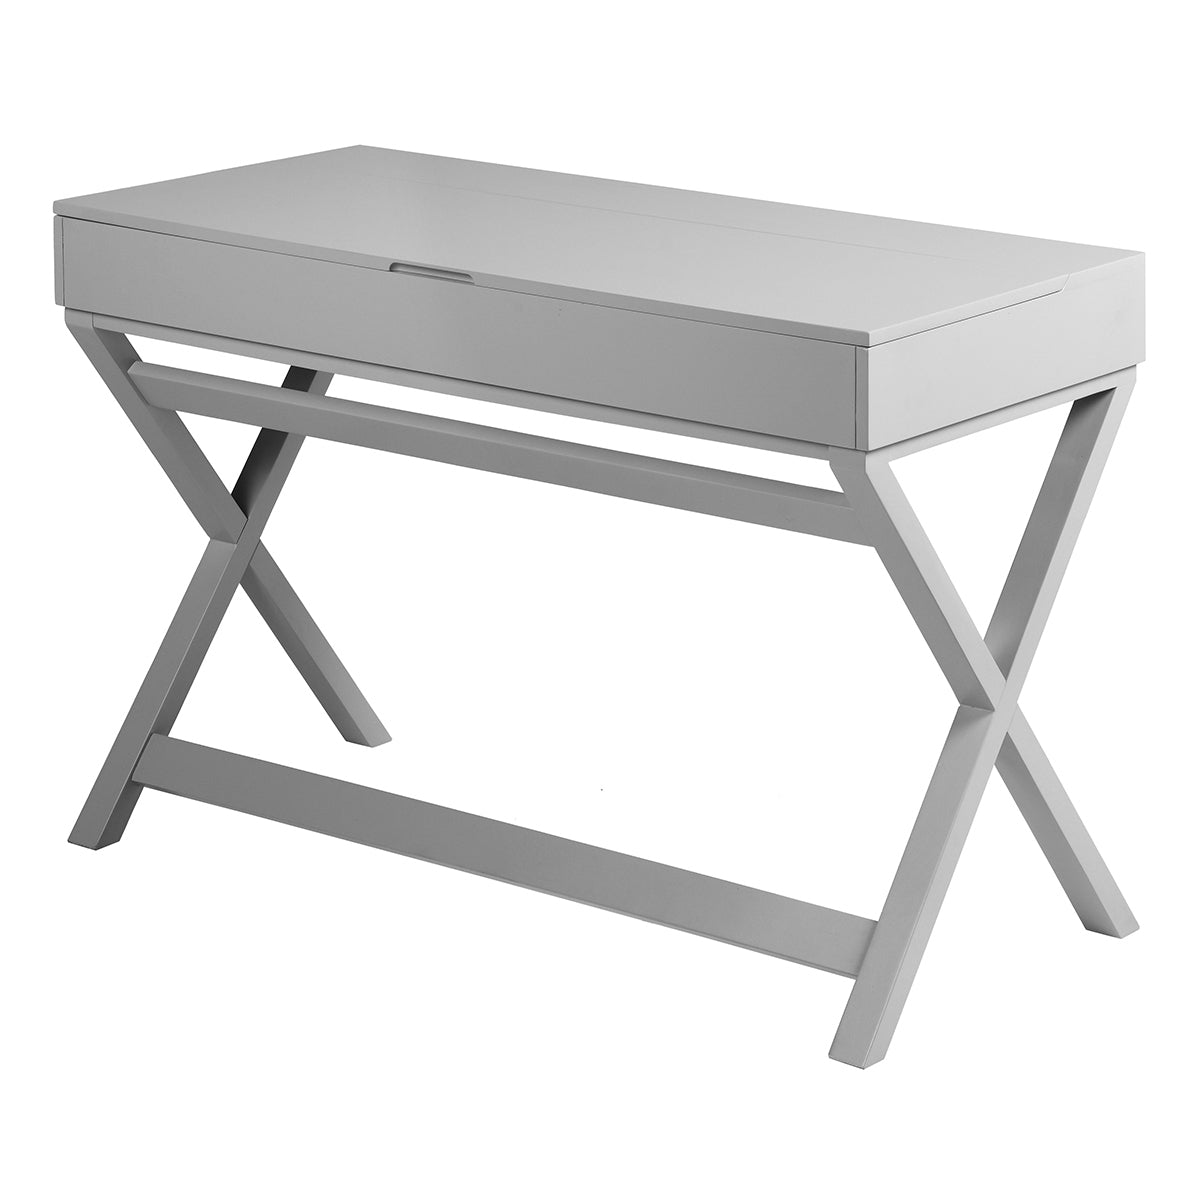 Lift Desk with 2 Drawer Storage, Computer Desk with Lift Table Top, Adjustable Height Table for Home Office, Living Room,grey